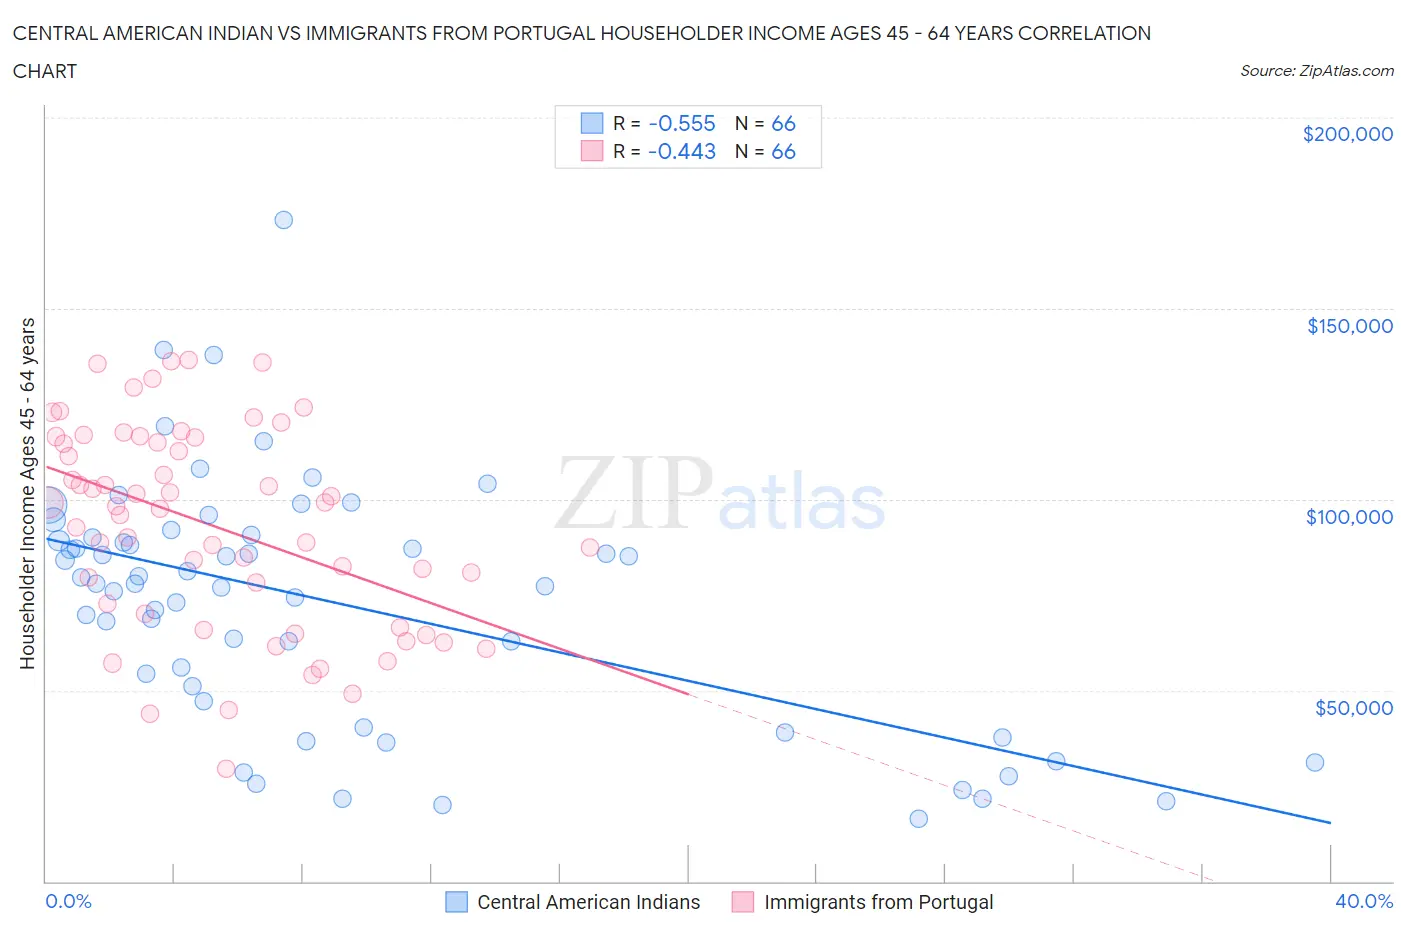 Central American Indian vs Immigrants from Portugal Householder Income Ages 45 - 64 years